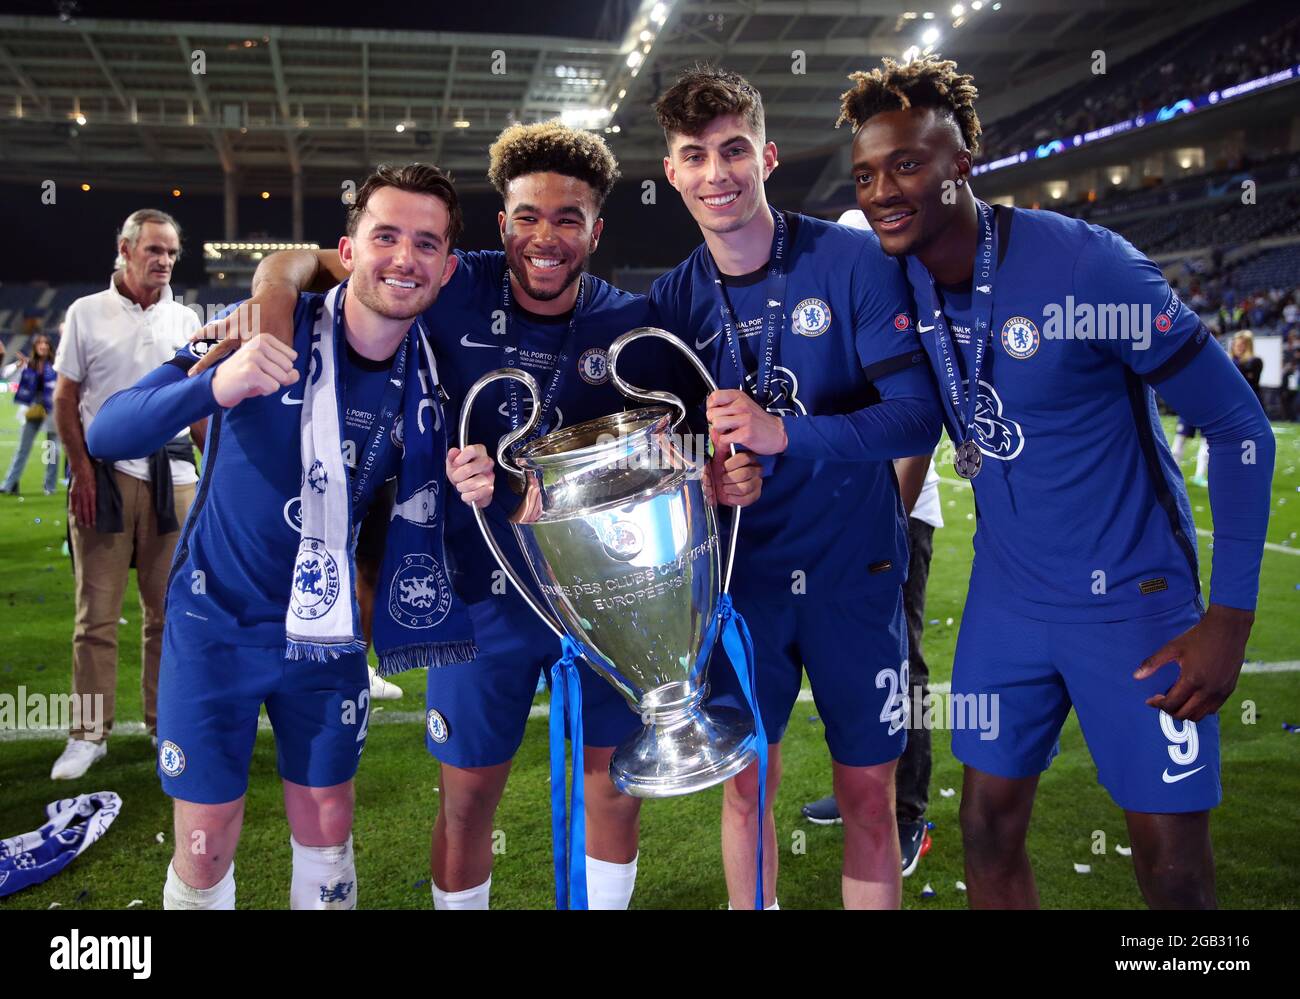 File Photo Dated 29 05 21 Of Chelsea S Ben Chilwell Reece James Kai Havertz And Tammy Abraham With The Trophy Following The Uefa Champions League Final Issue Date Monday August 2 21 Stock Photo Alamy